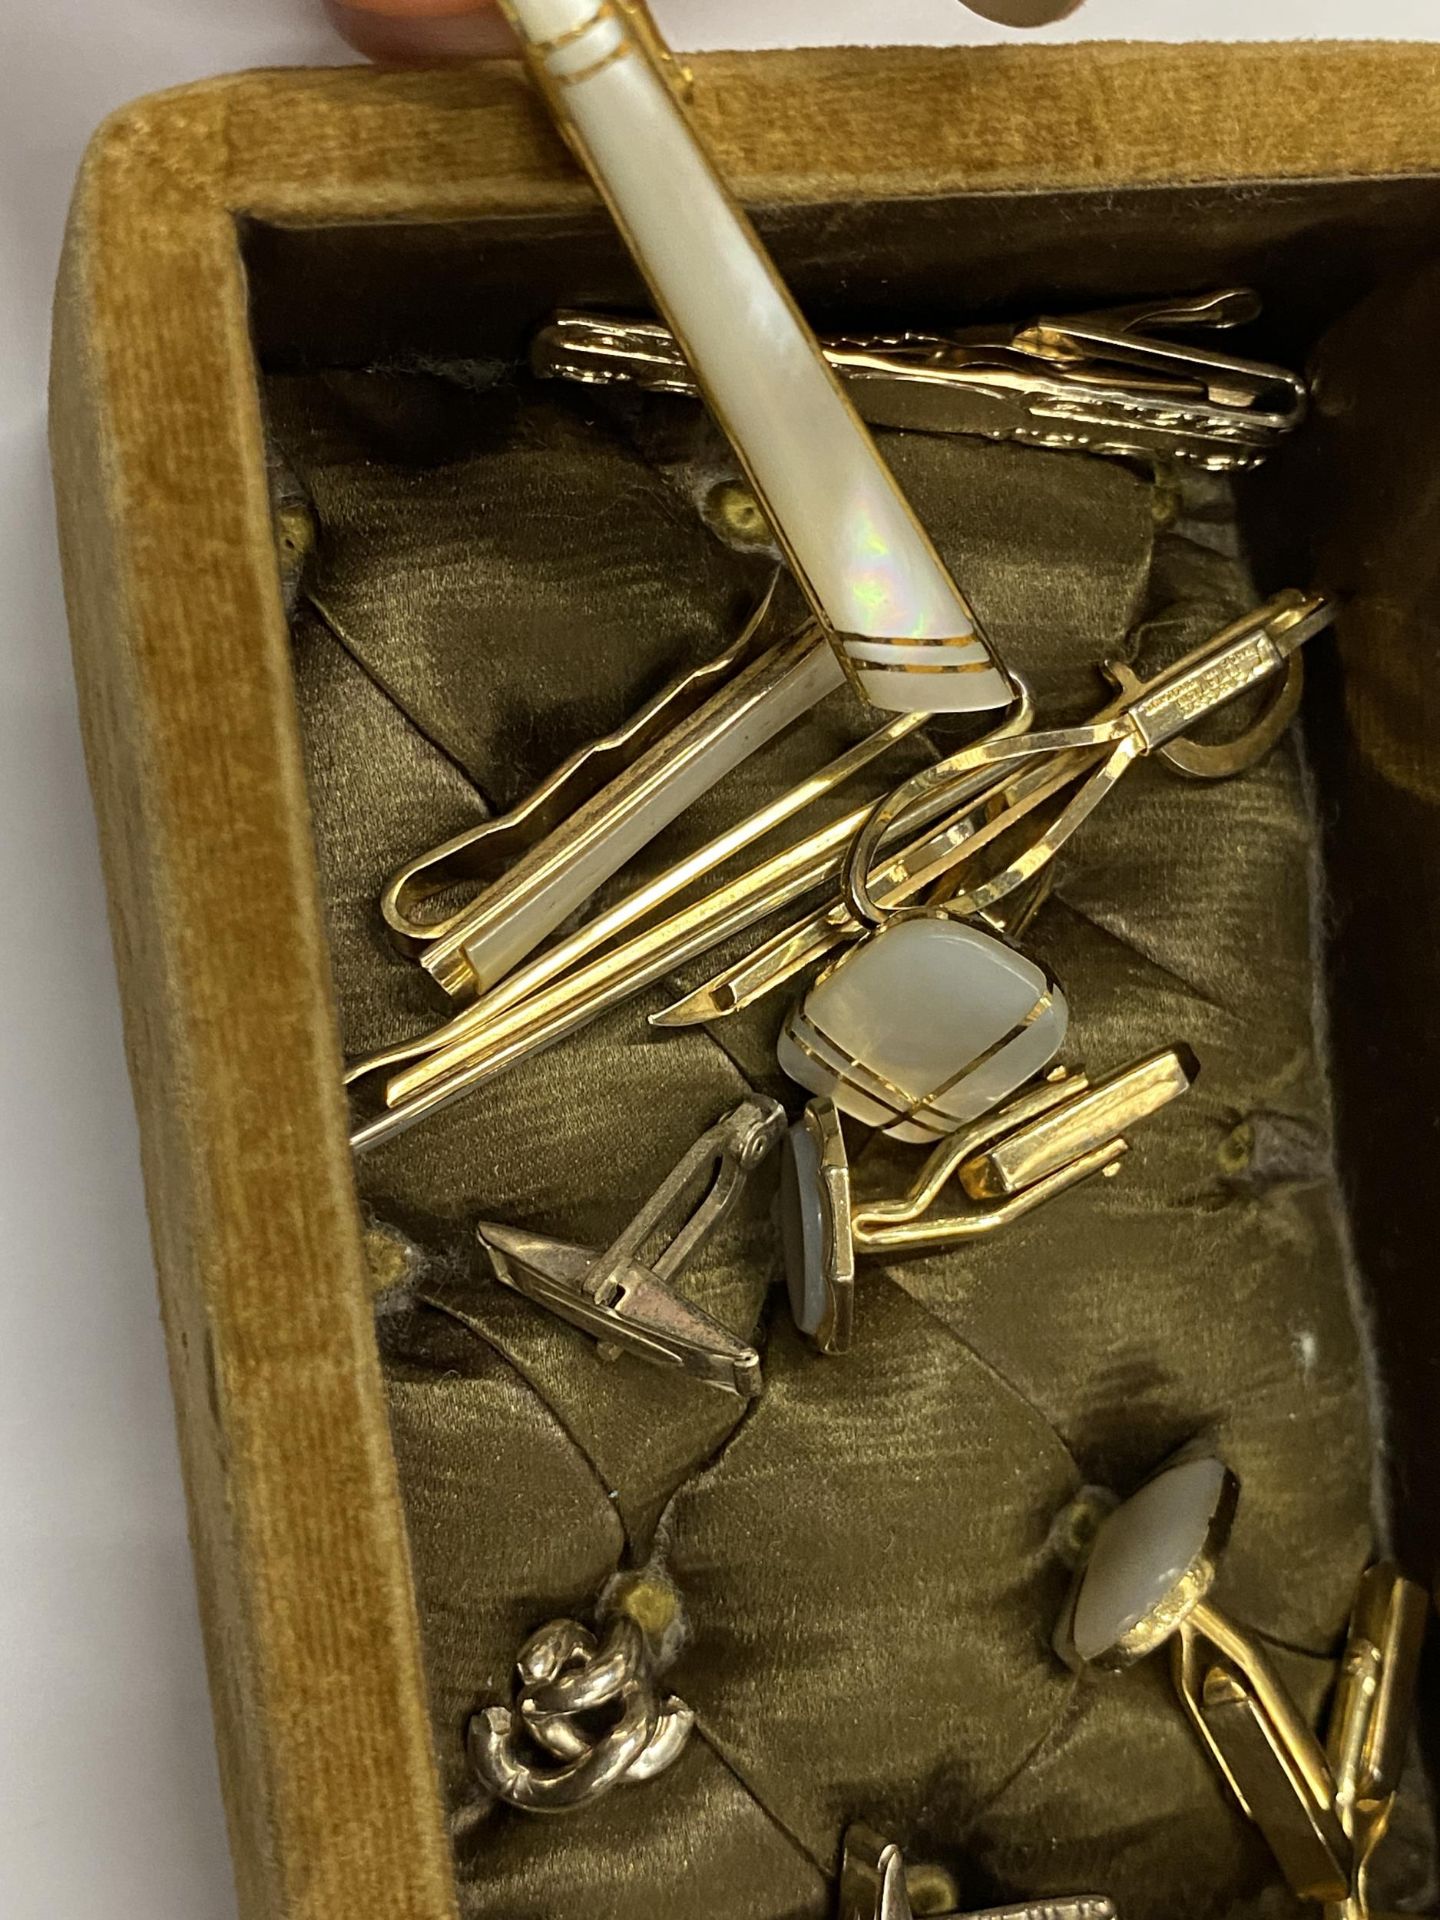 A BOX OF VINTAGE CUFFLINKS AND TIE CLIPS - Image 3 of 4